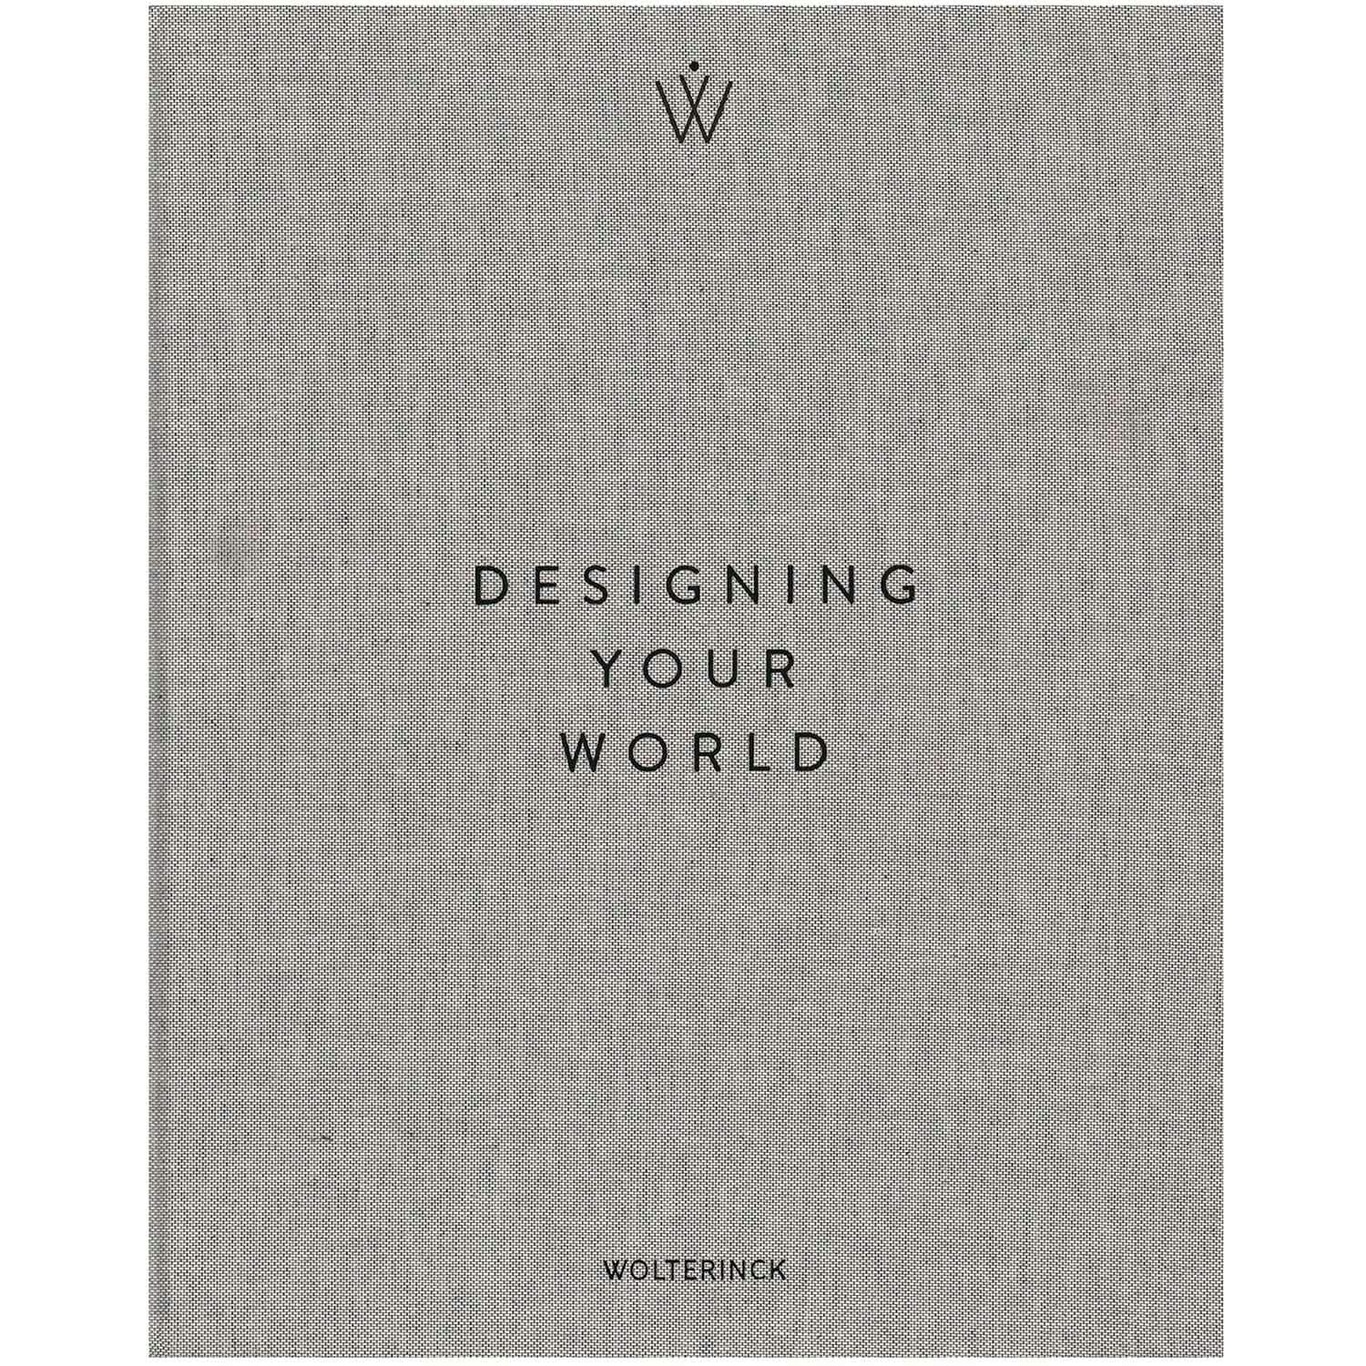 Designing your World Book